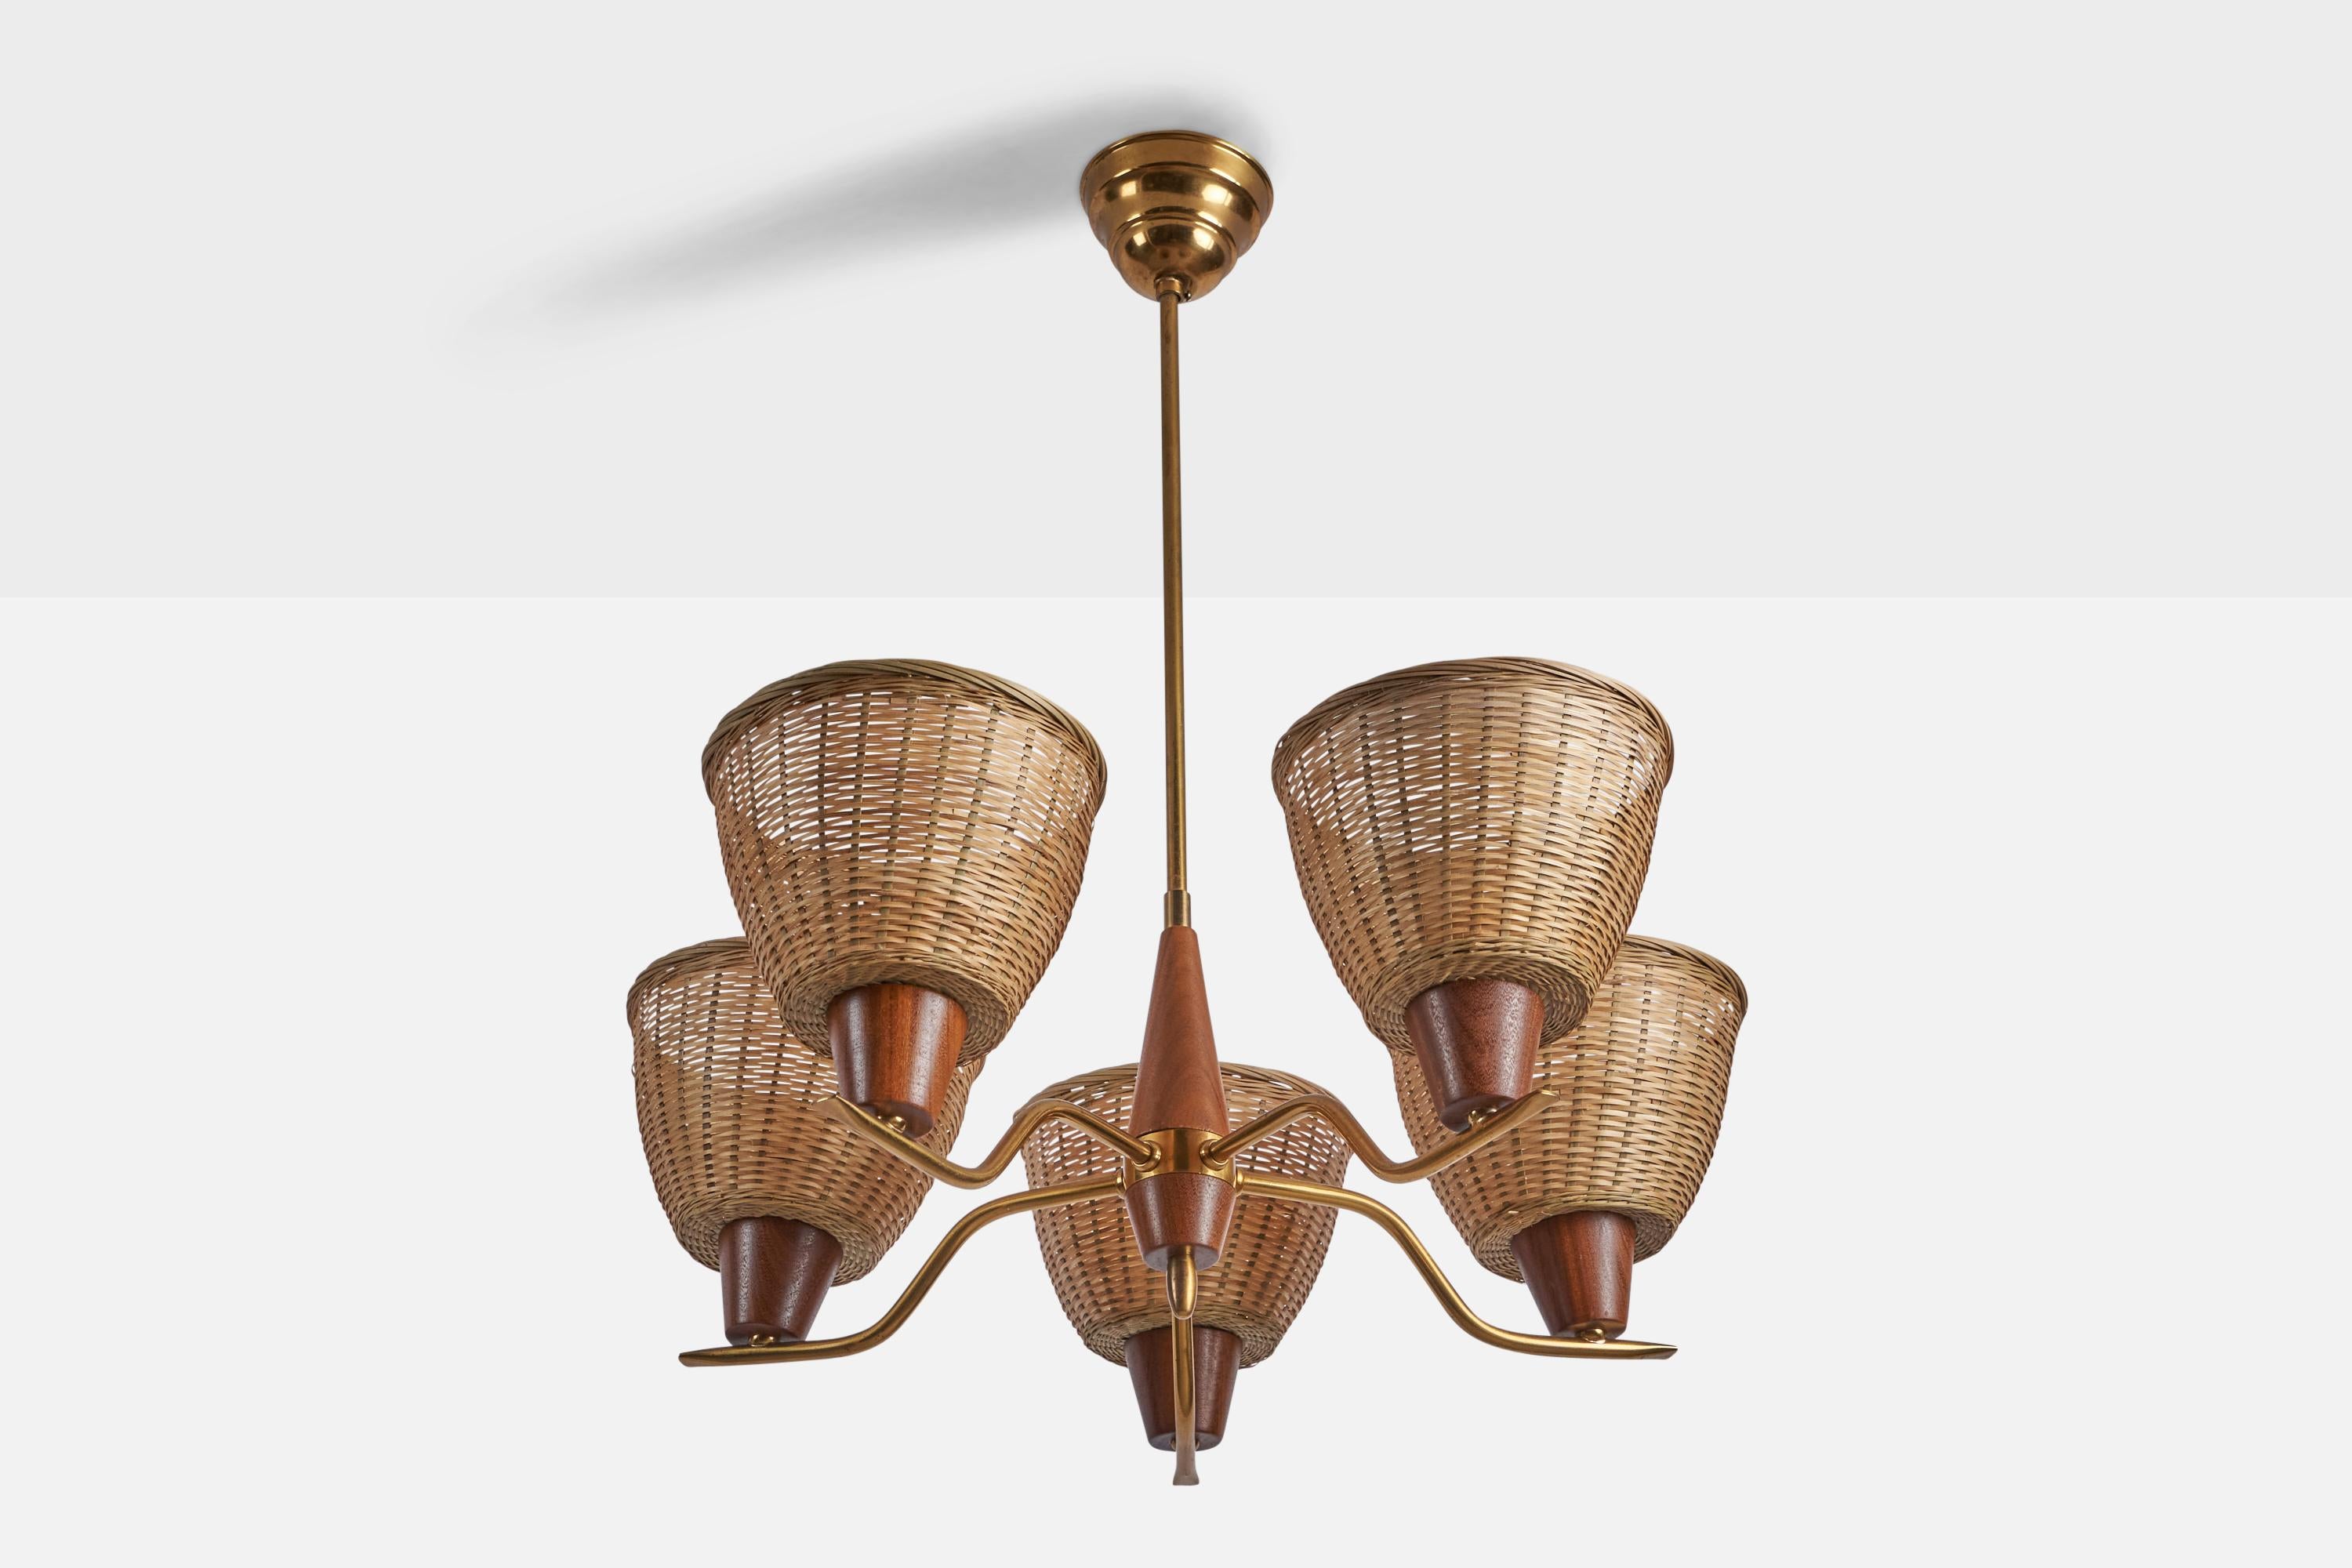 A five-armed brass, teak and rattan chandelier designed and produced in Sweden, 1950s.

Overall Dimensions (inches): 25” H x 21” Diameter
Bulb Specifications: E-26 Bulb
Number of Sockets: 5